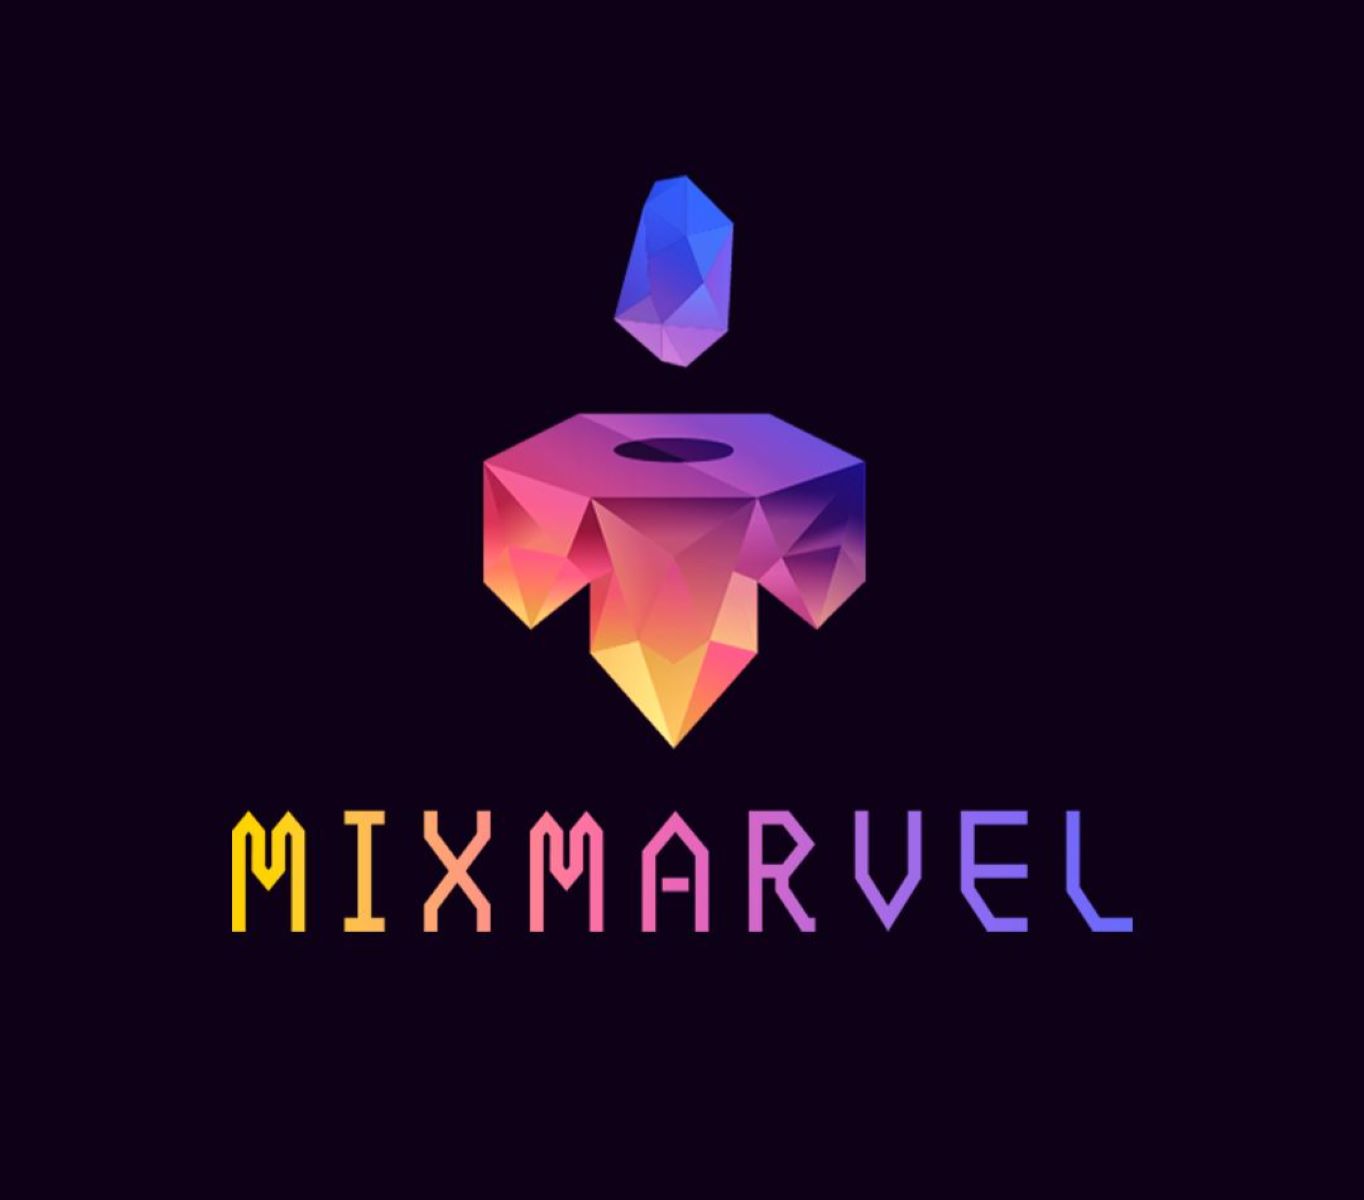 17-extraordinary-facts-about-mixmarvel-mix